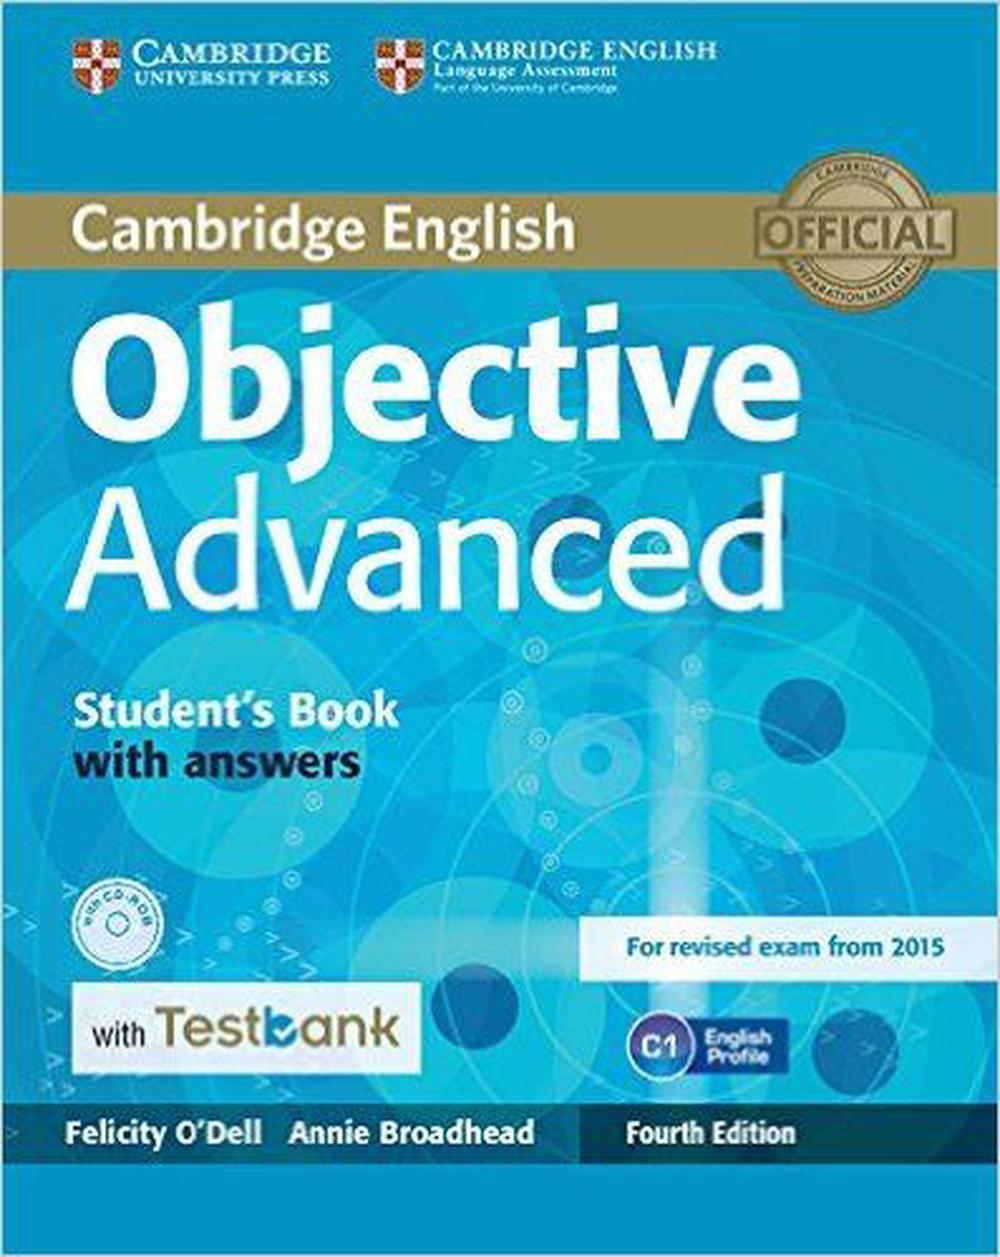 9781107542358　Paperback,　by　with　with　with　online　The　at　Answers　CD-ROM　Advanced　Buy　Testbank　O'Dell,　Nile　Book　Student's　Objective　Felicity